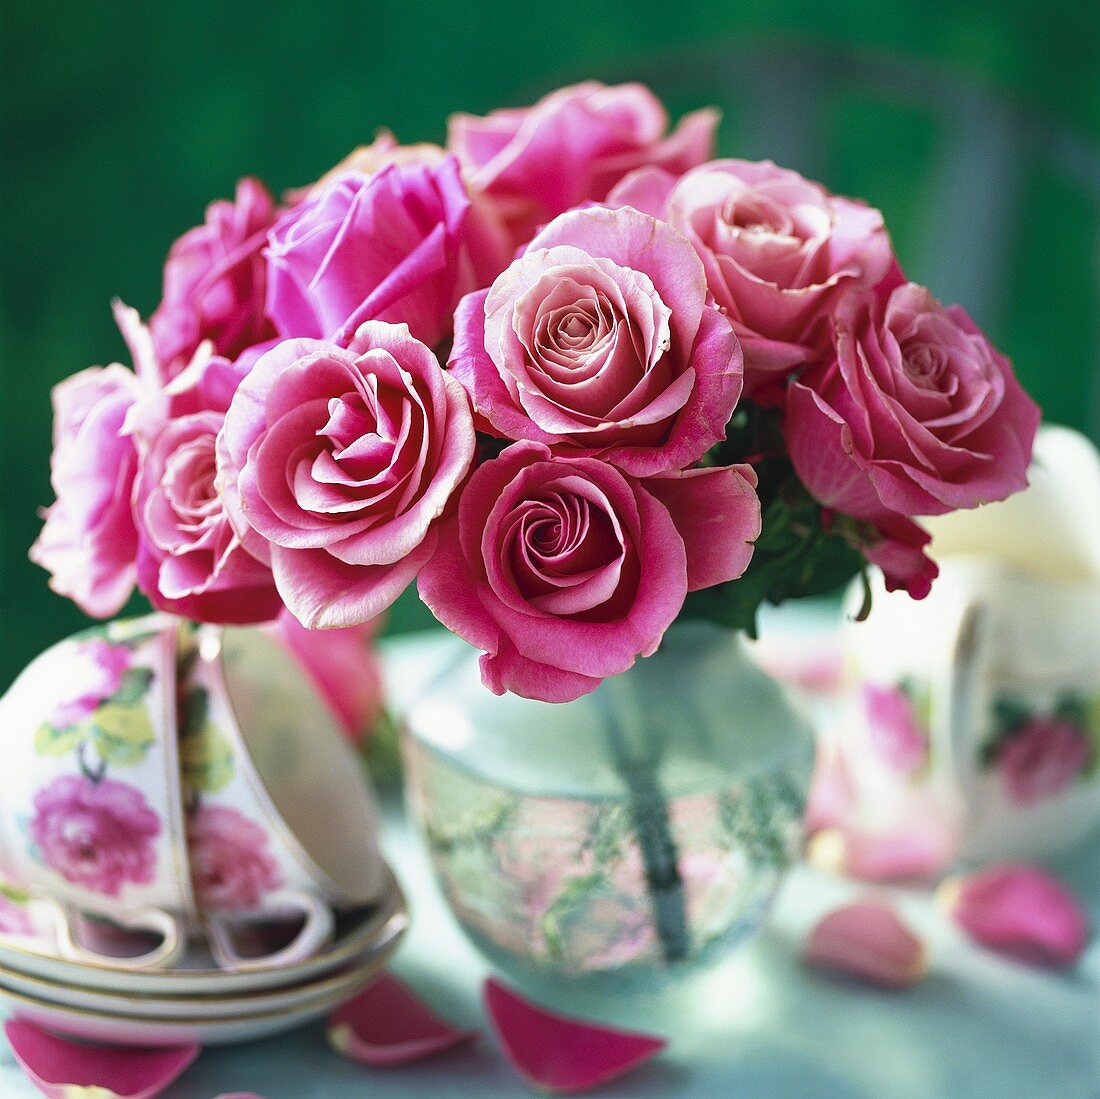 Pink roses and cups and saucers